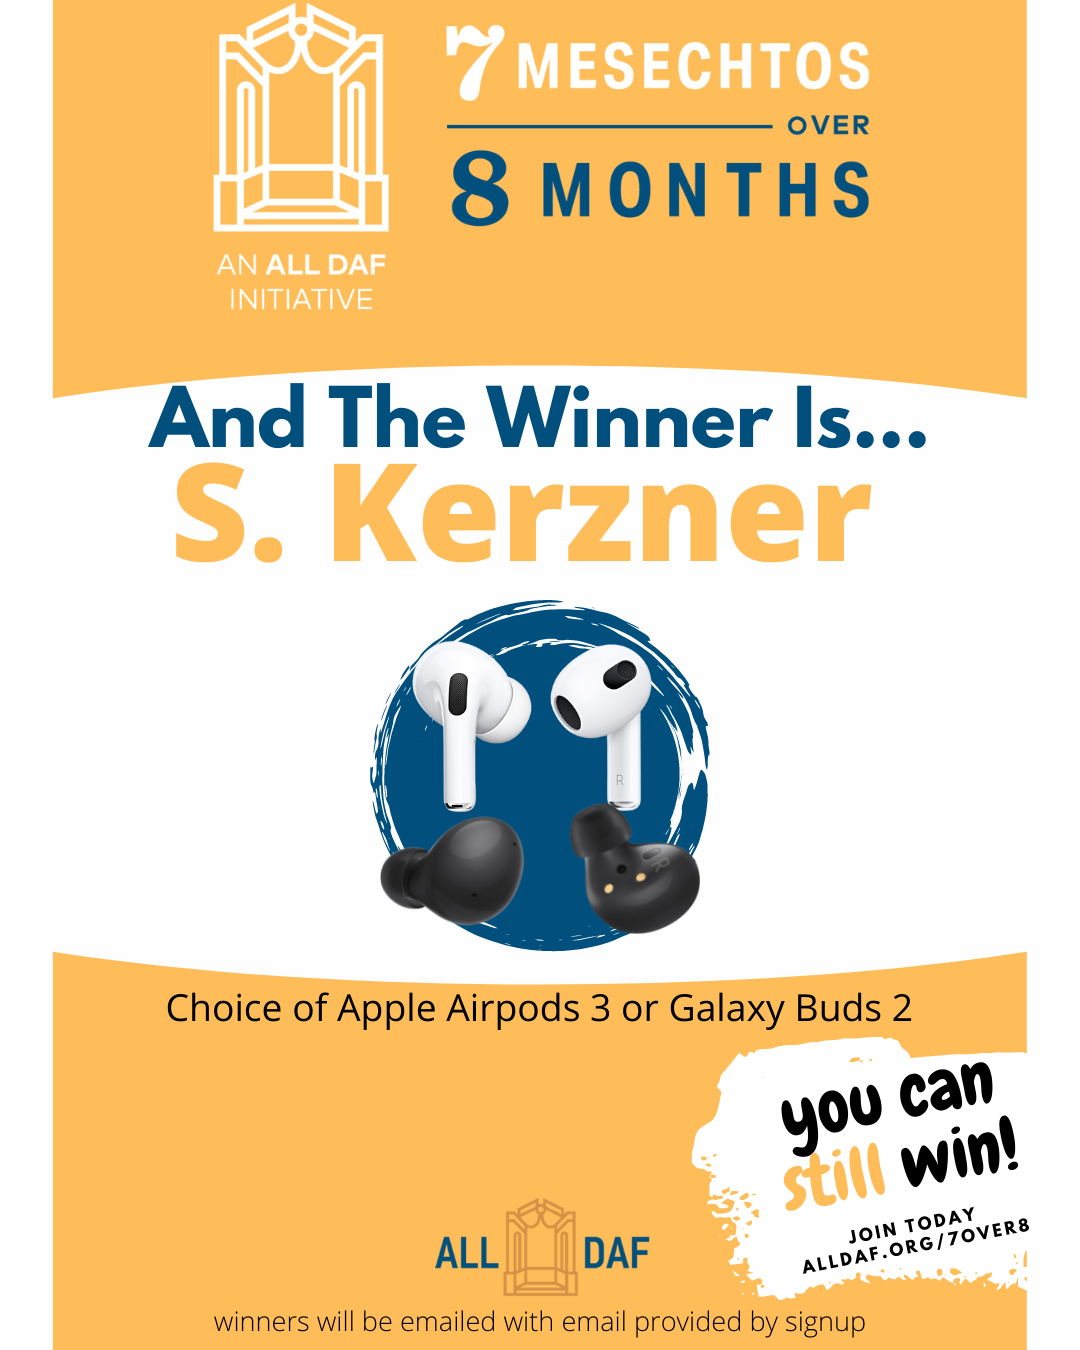 And The Winner Is: S. Kerzner